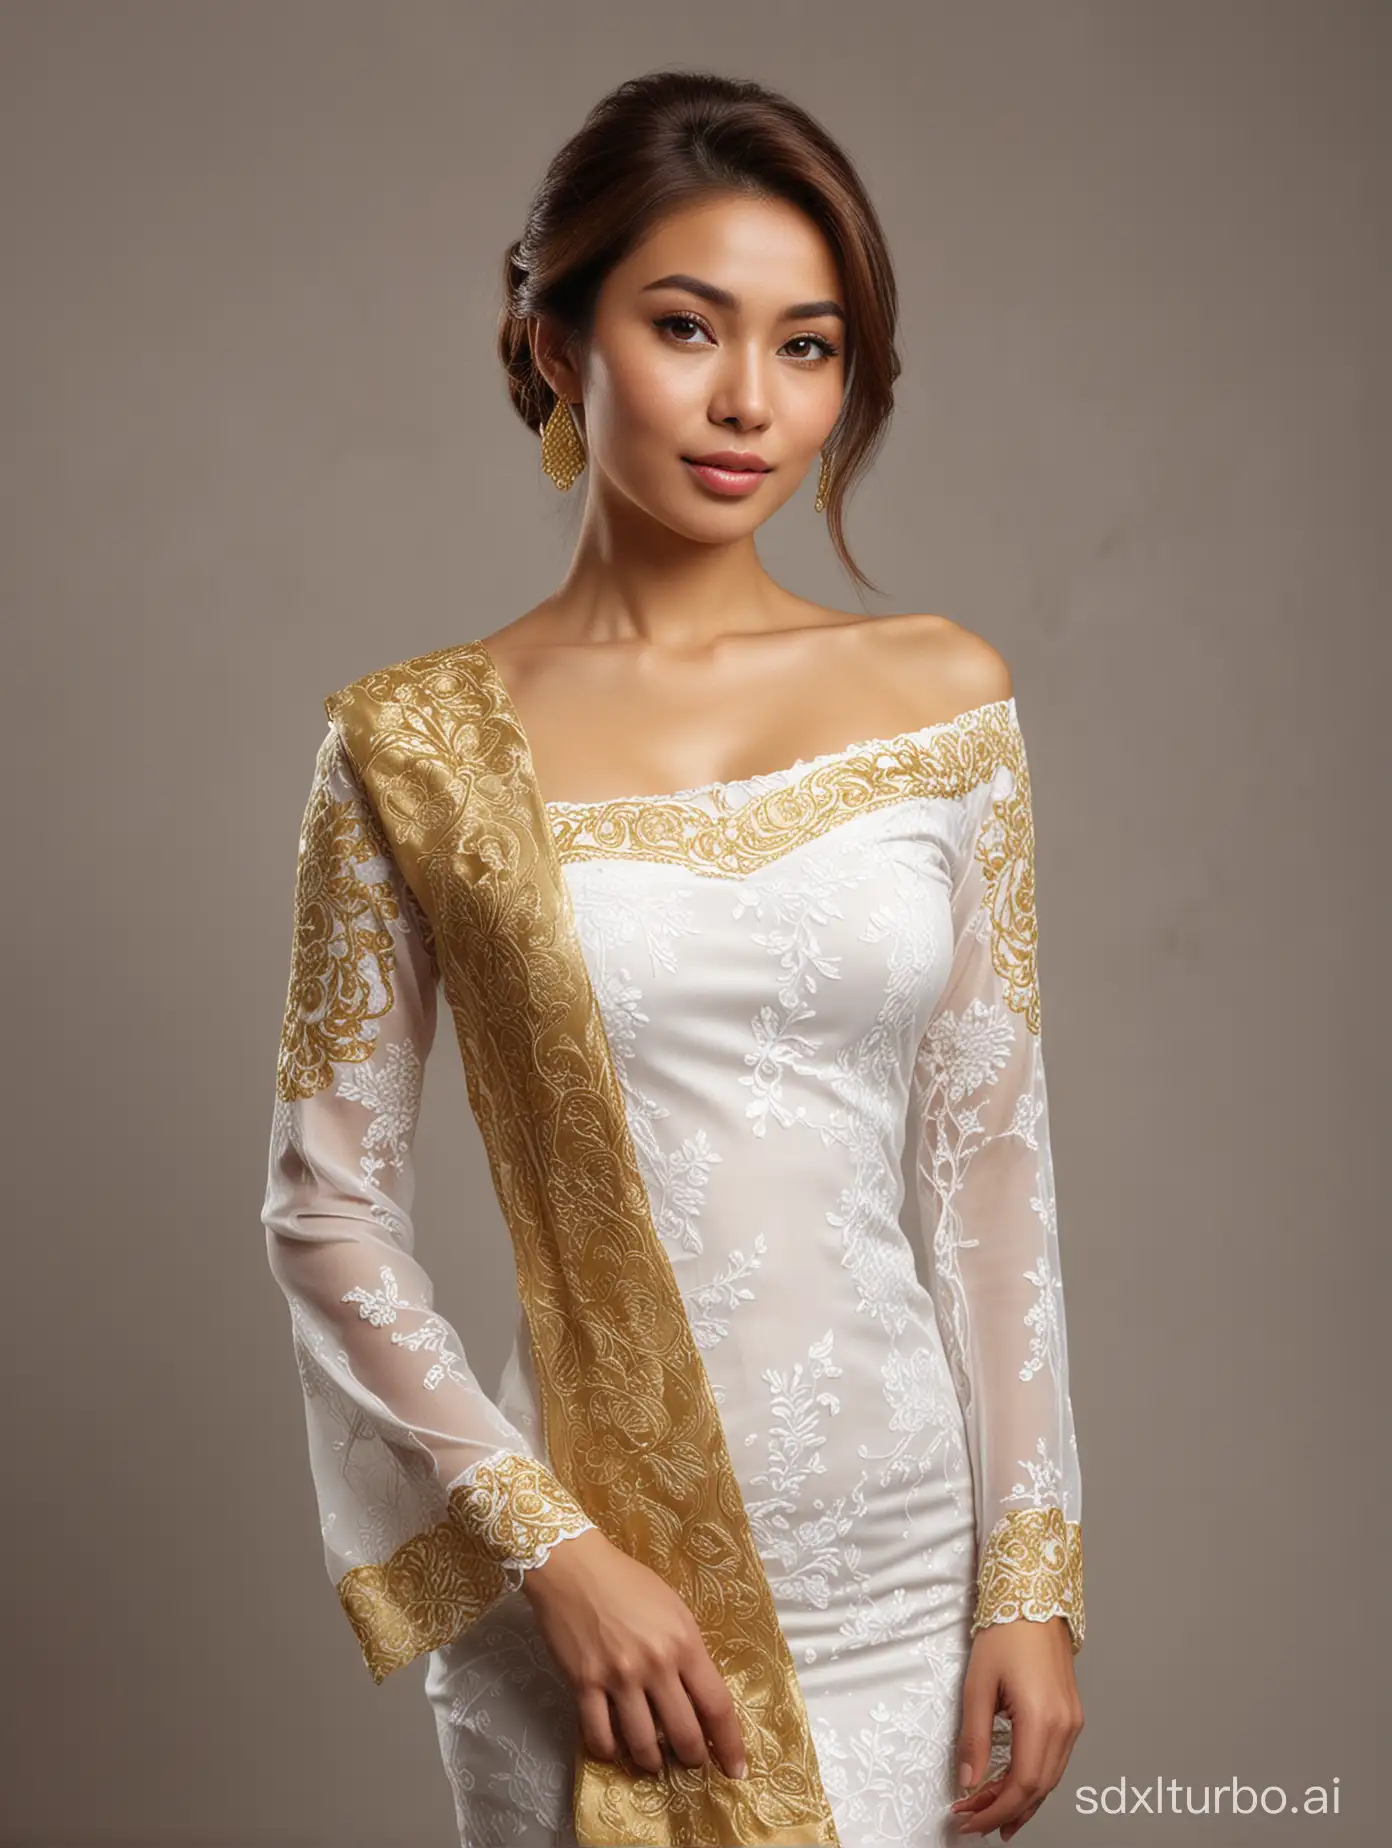 medium brown haired woman, slim body, (small breast), wearing traditional Javanese white kebaya dress, with golden scarf on one shoulder, shoulder less, realistic